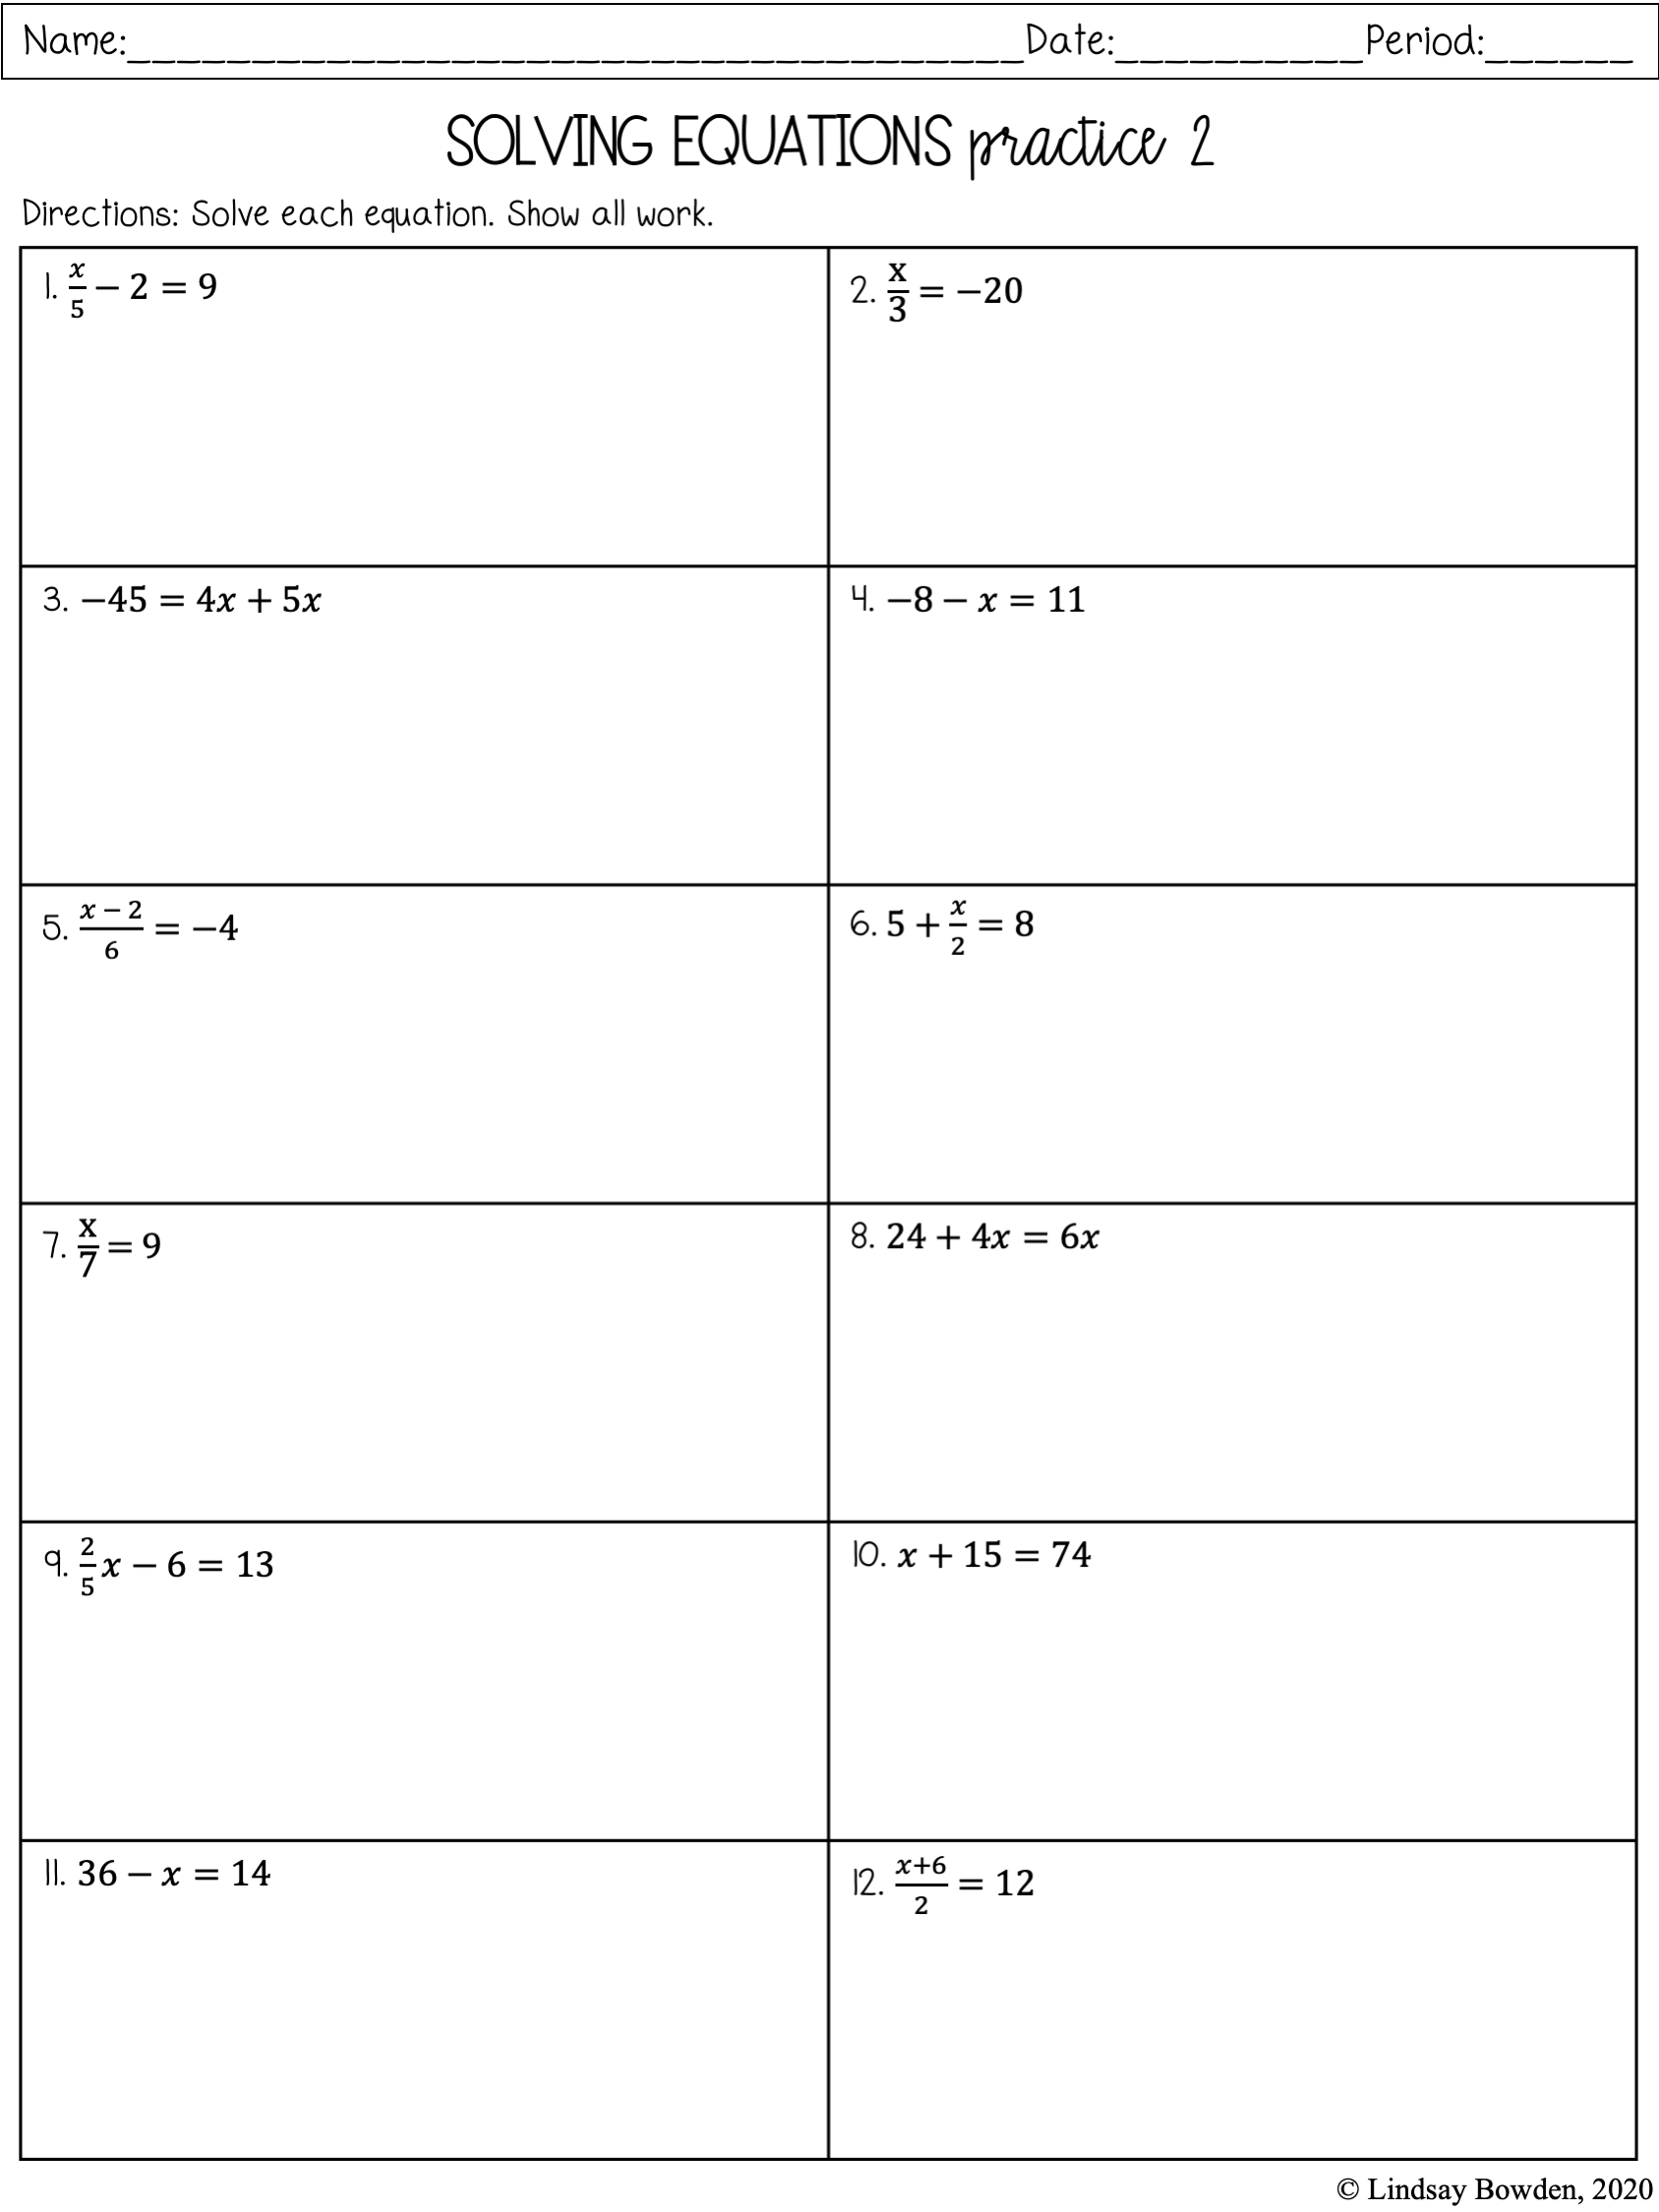 Solving One and Two-Step Equations - Lindsay Bowden Regarding Solve 2 Step Equations Worksheet